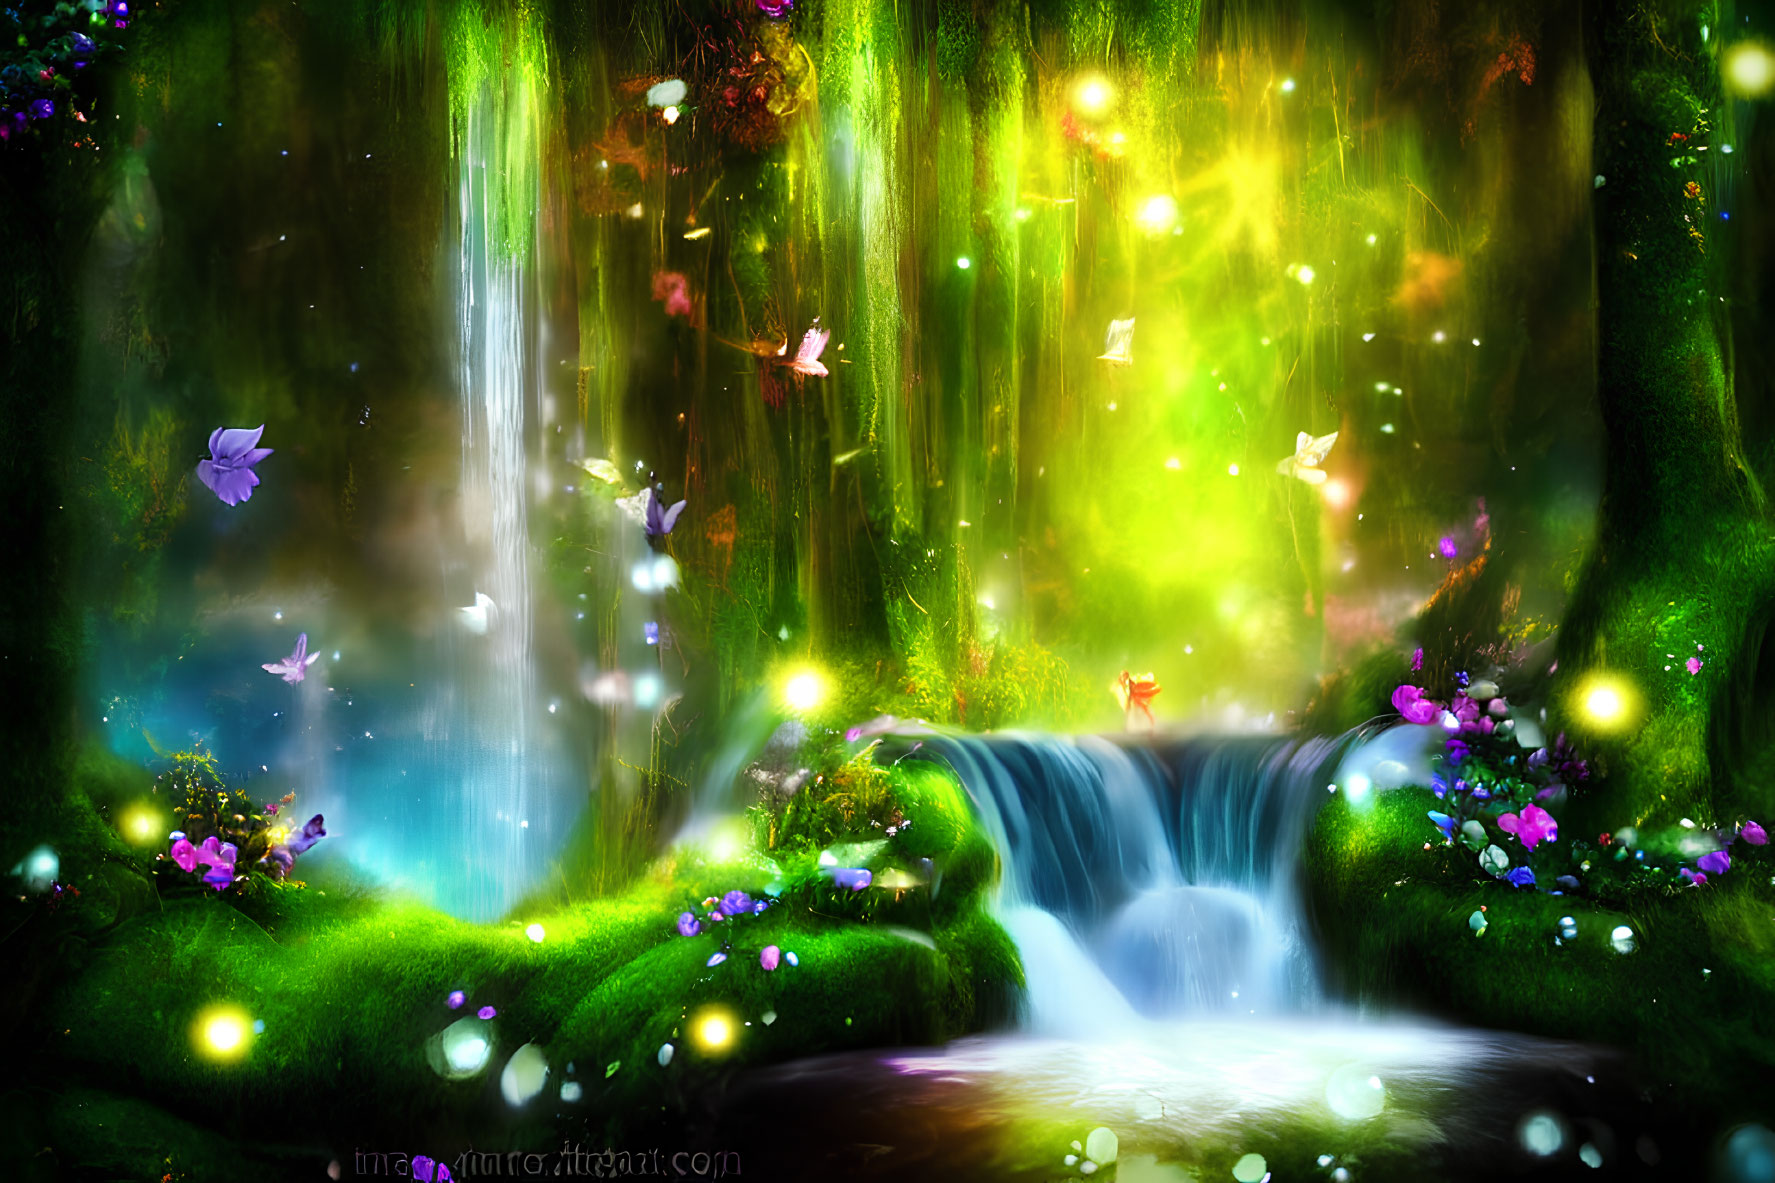 Fantasy forest scene with waterfall, glowing lights, butterflies, lush greenery